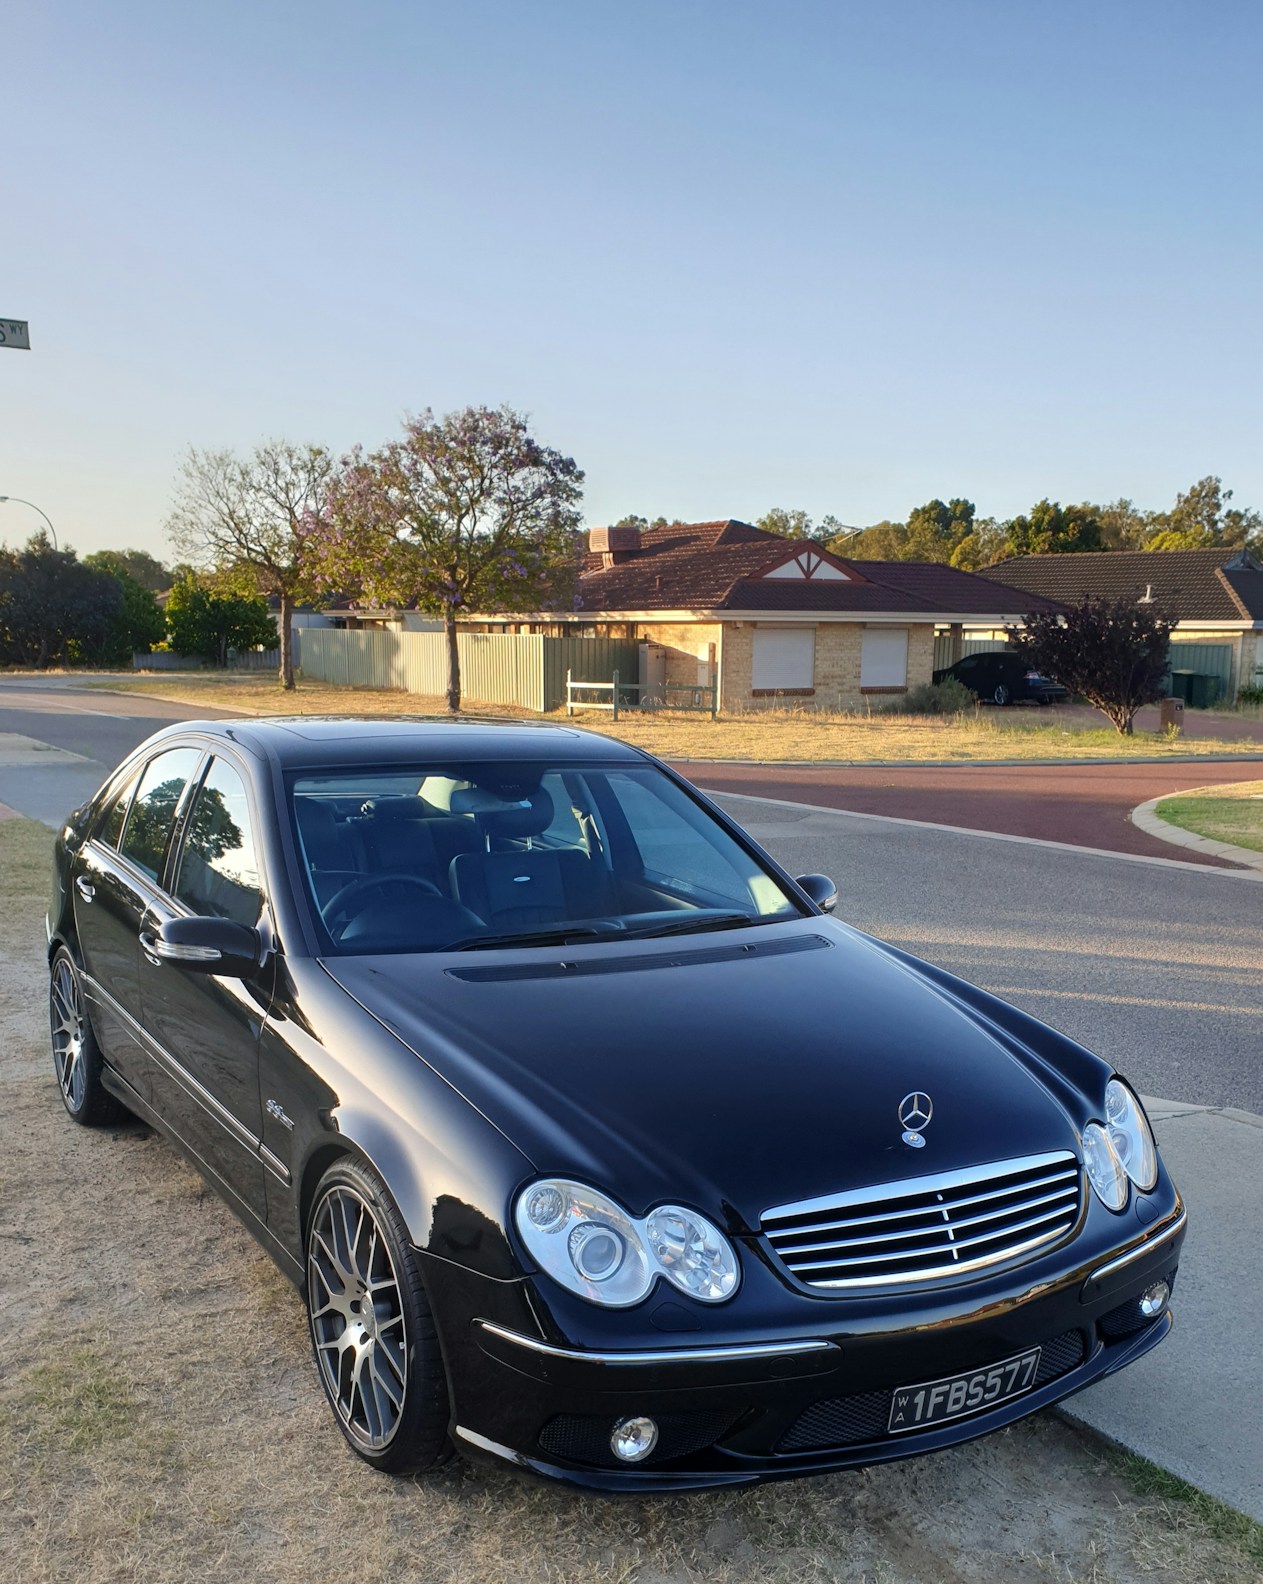 2005 Mercedes-Benz (W203) C55 AMG for sale by classified listing privately  in Perth, WA, Australia